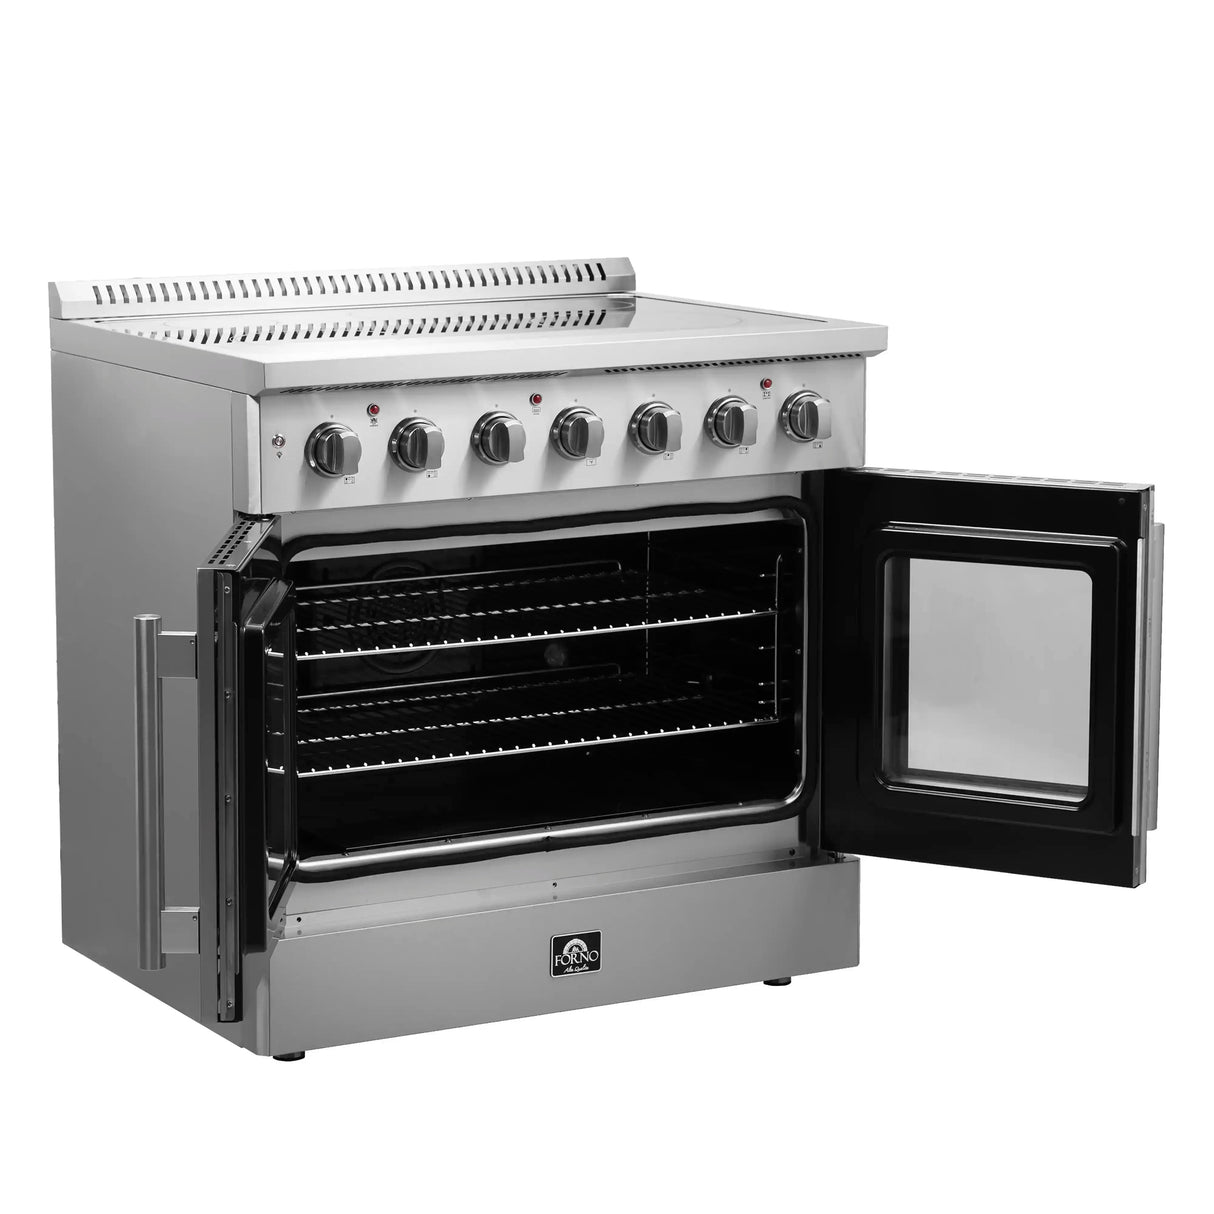 Forno Galiano 36-Inch French Door Electric Range with Convection Oven in Stainless Steel (FFSEL6917-36)